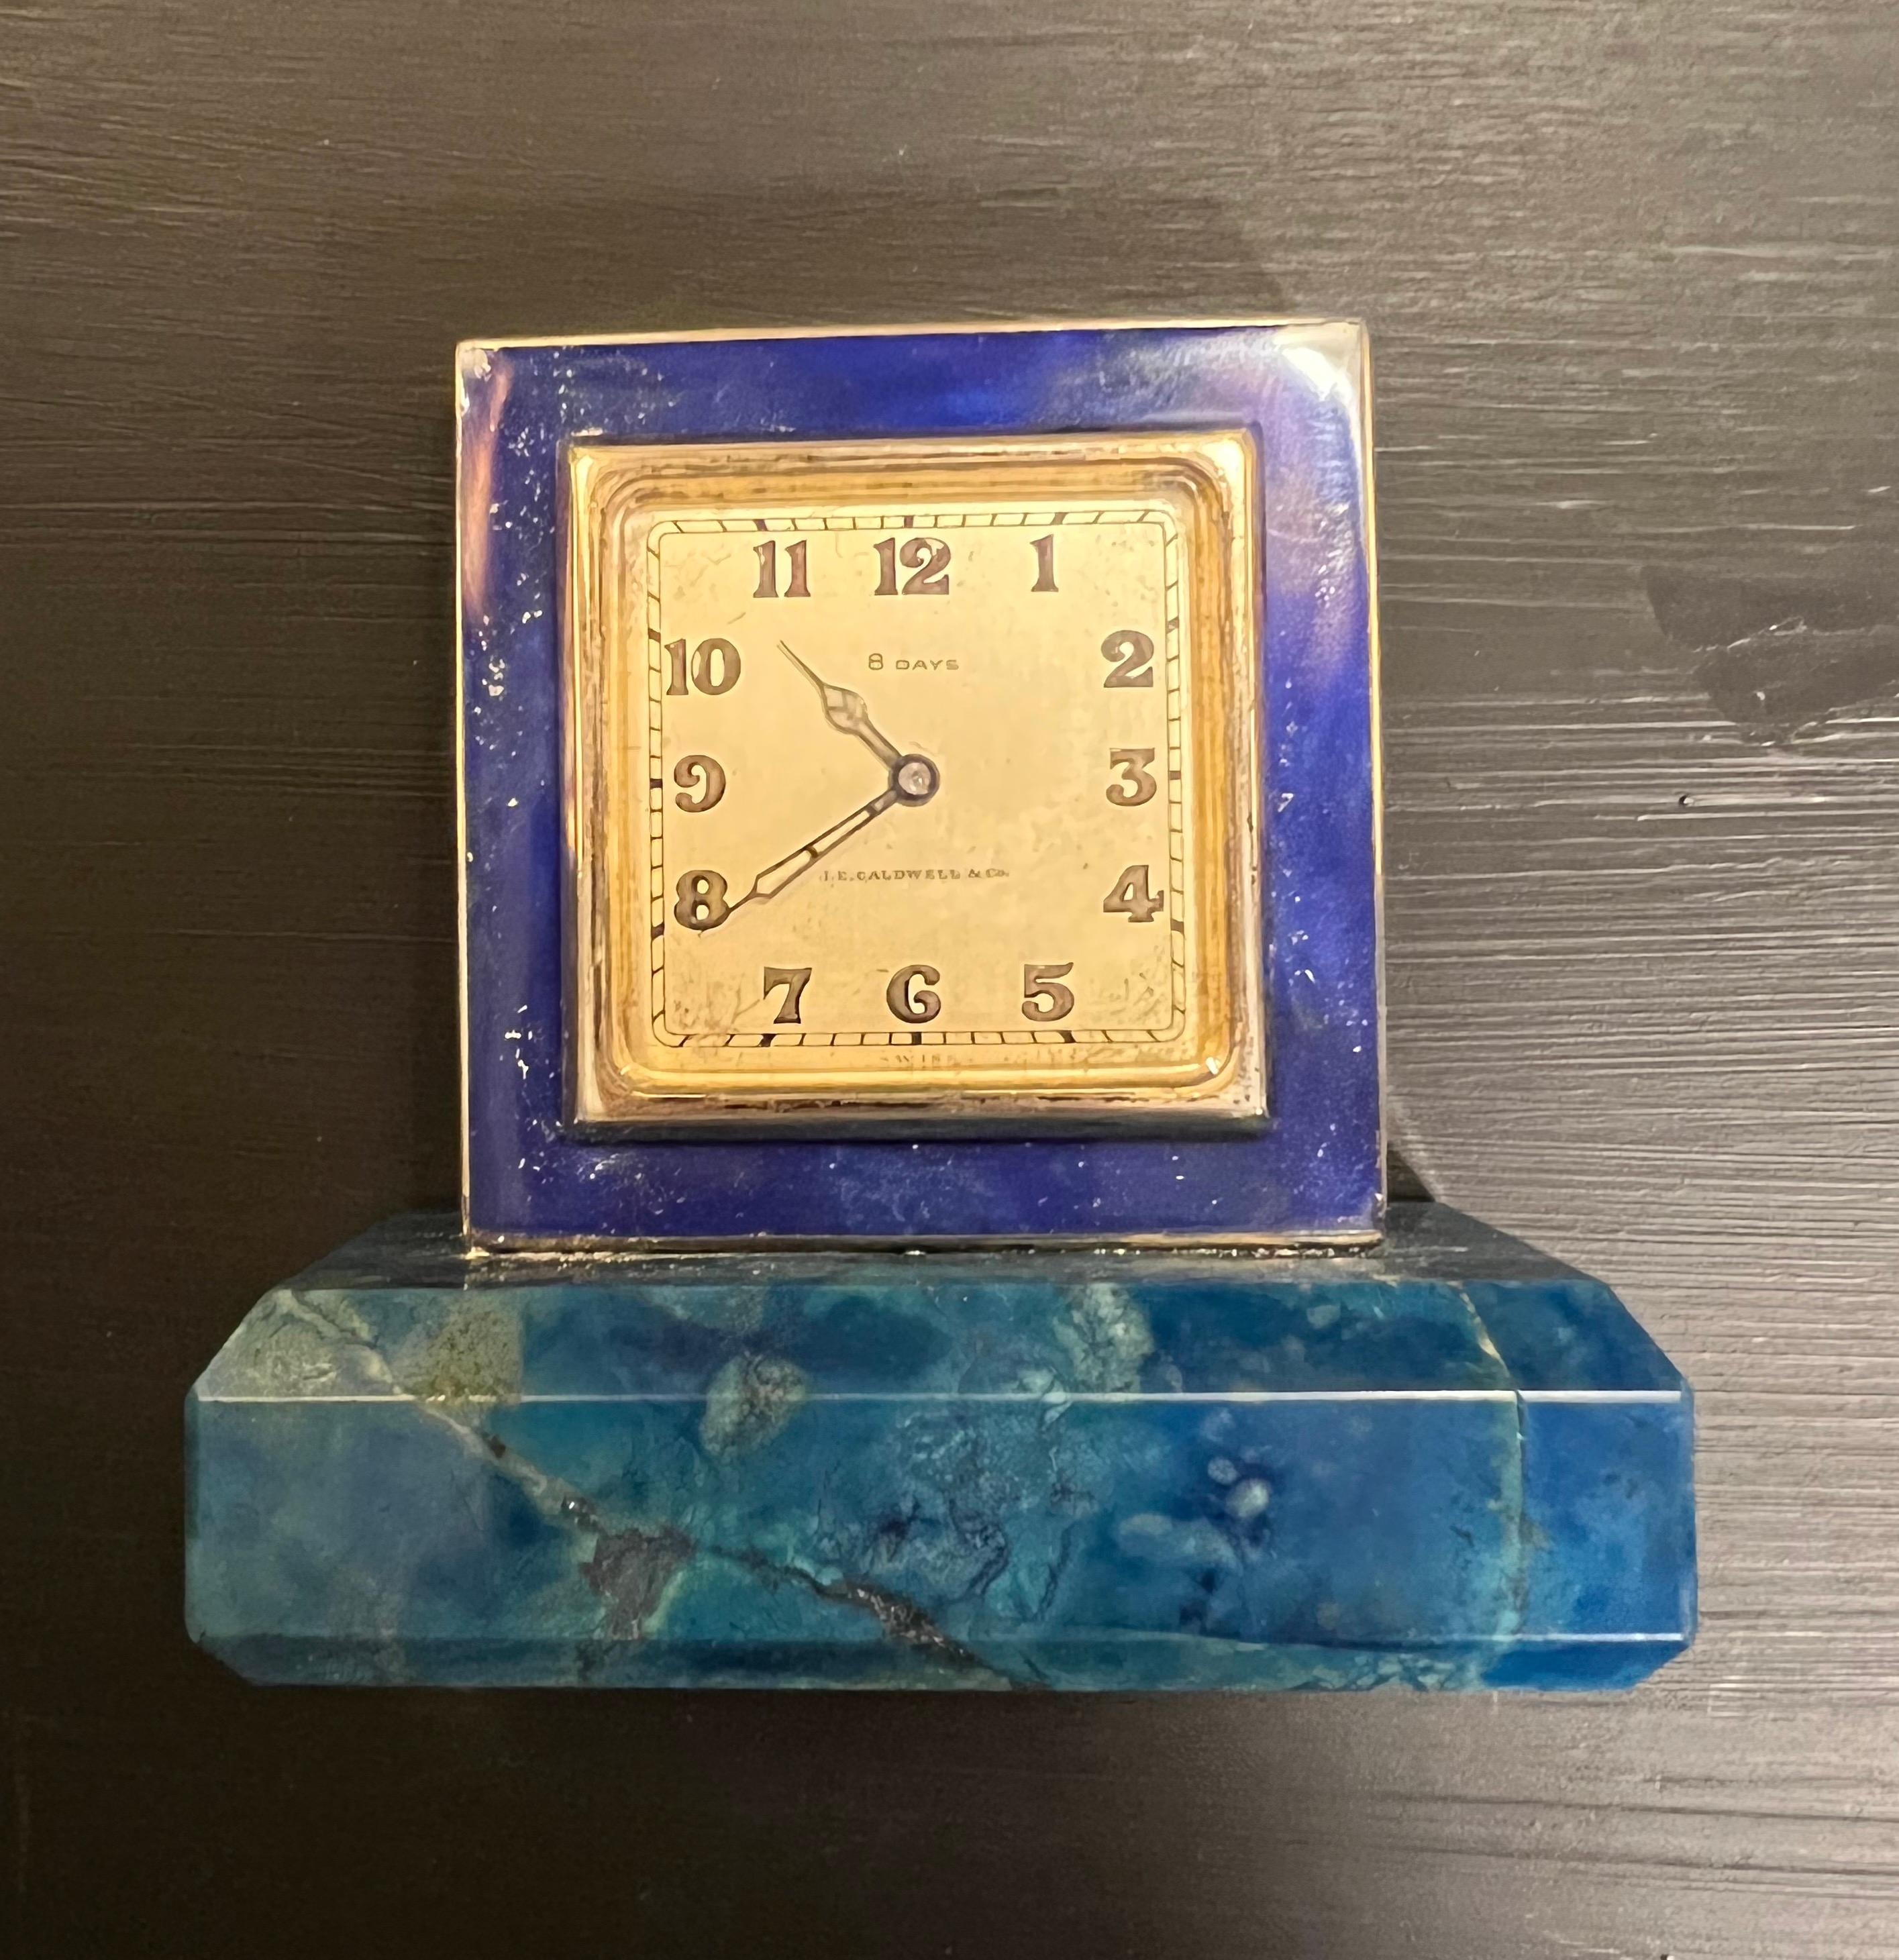 Mr. Giallo is opening his personal vault to sell a collection of his treasured antiques he's held on for so long.

About item
Stunning Rich Blue Sodalite Base & Lapis Top trimmed with Sterling Silver Desk Clock by J.E. Caldwell & Co. Circa 1930s.